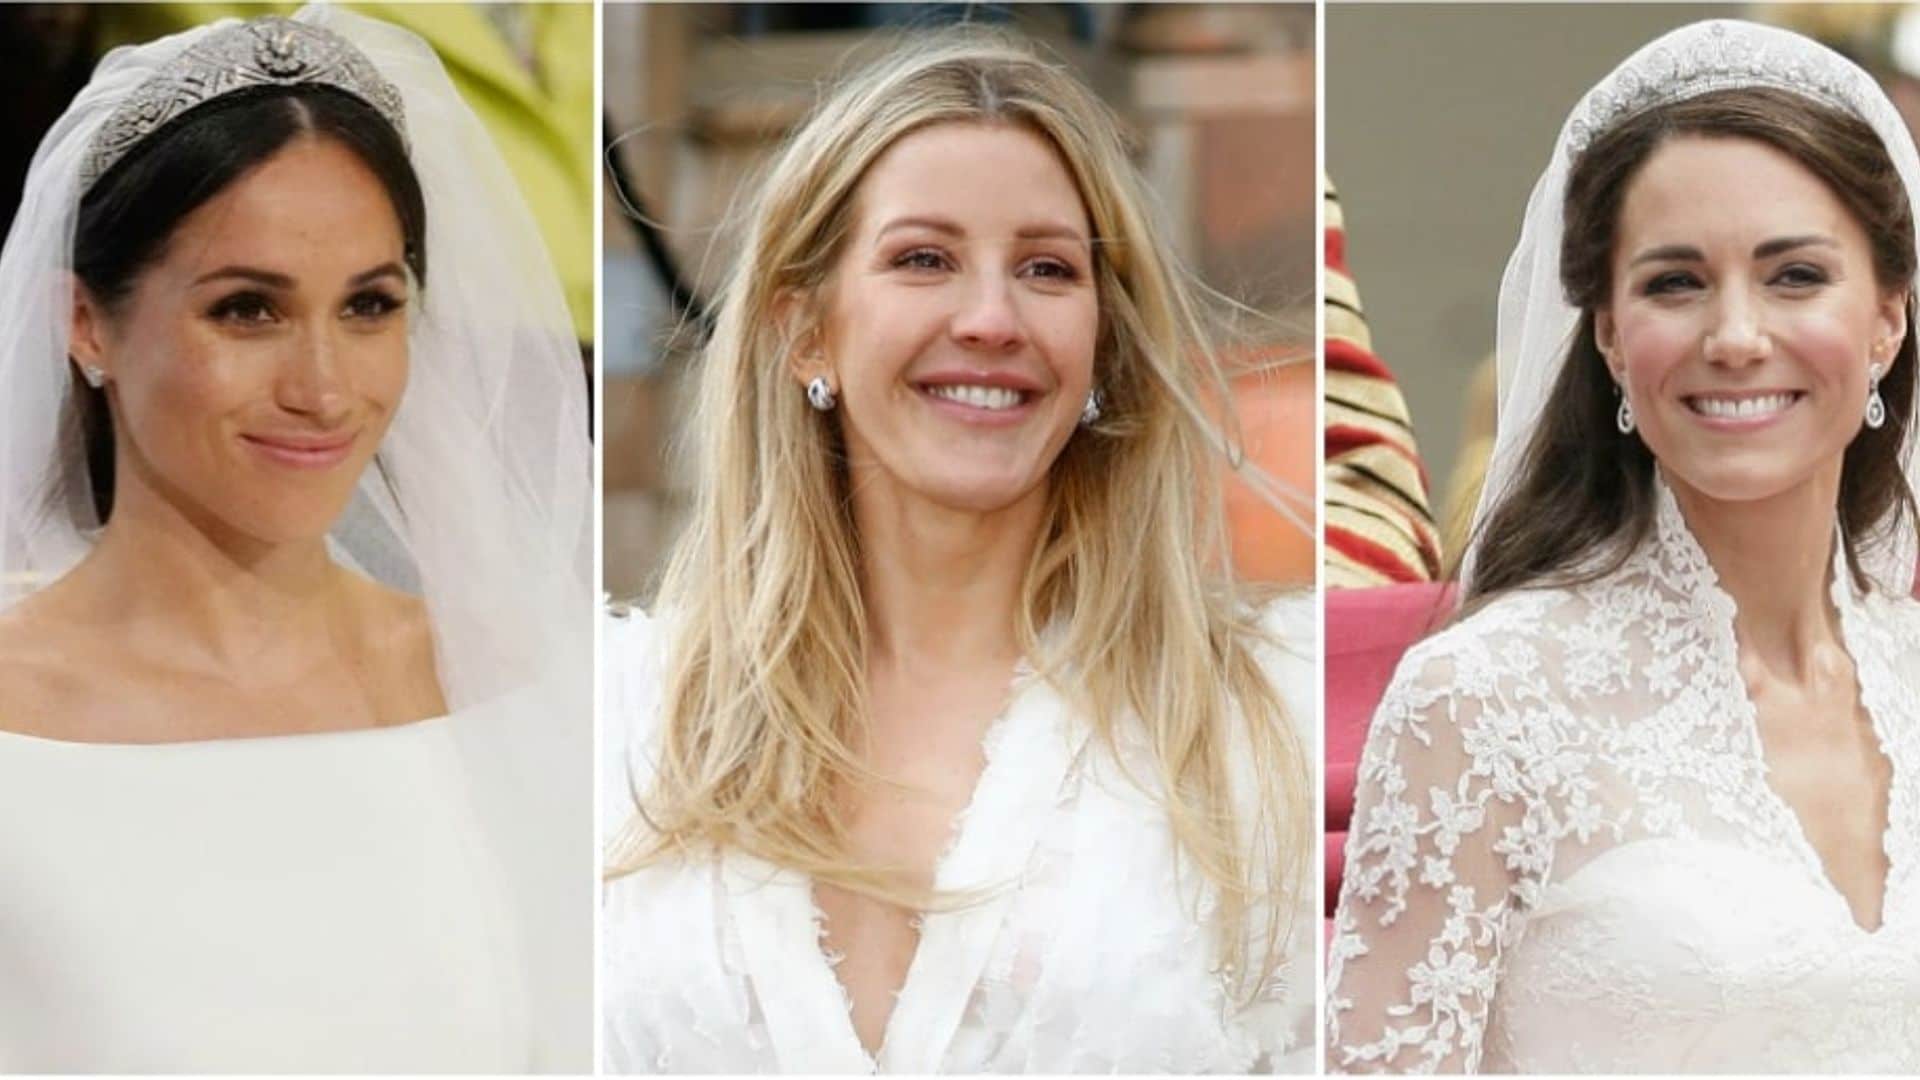 Ellie Goulding enlisted Meghan and Kate's legendary royal wedding planner and you can too!